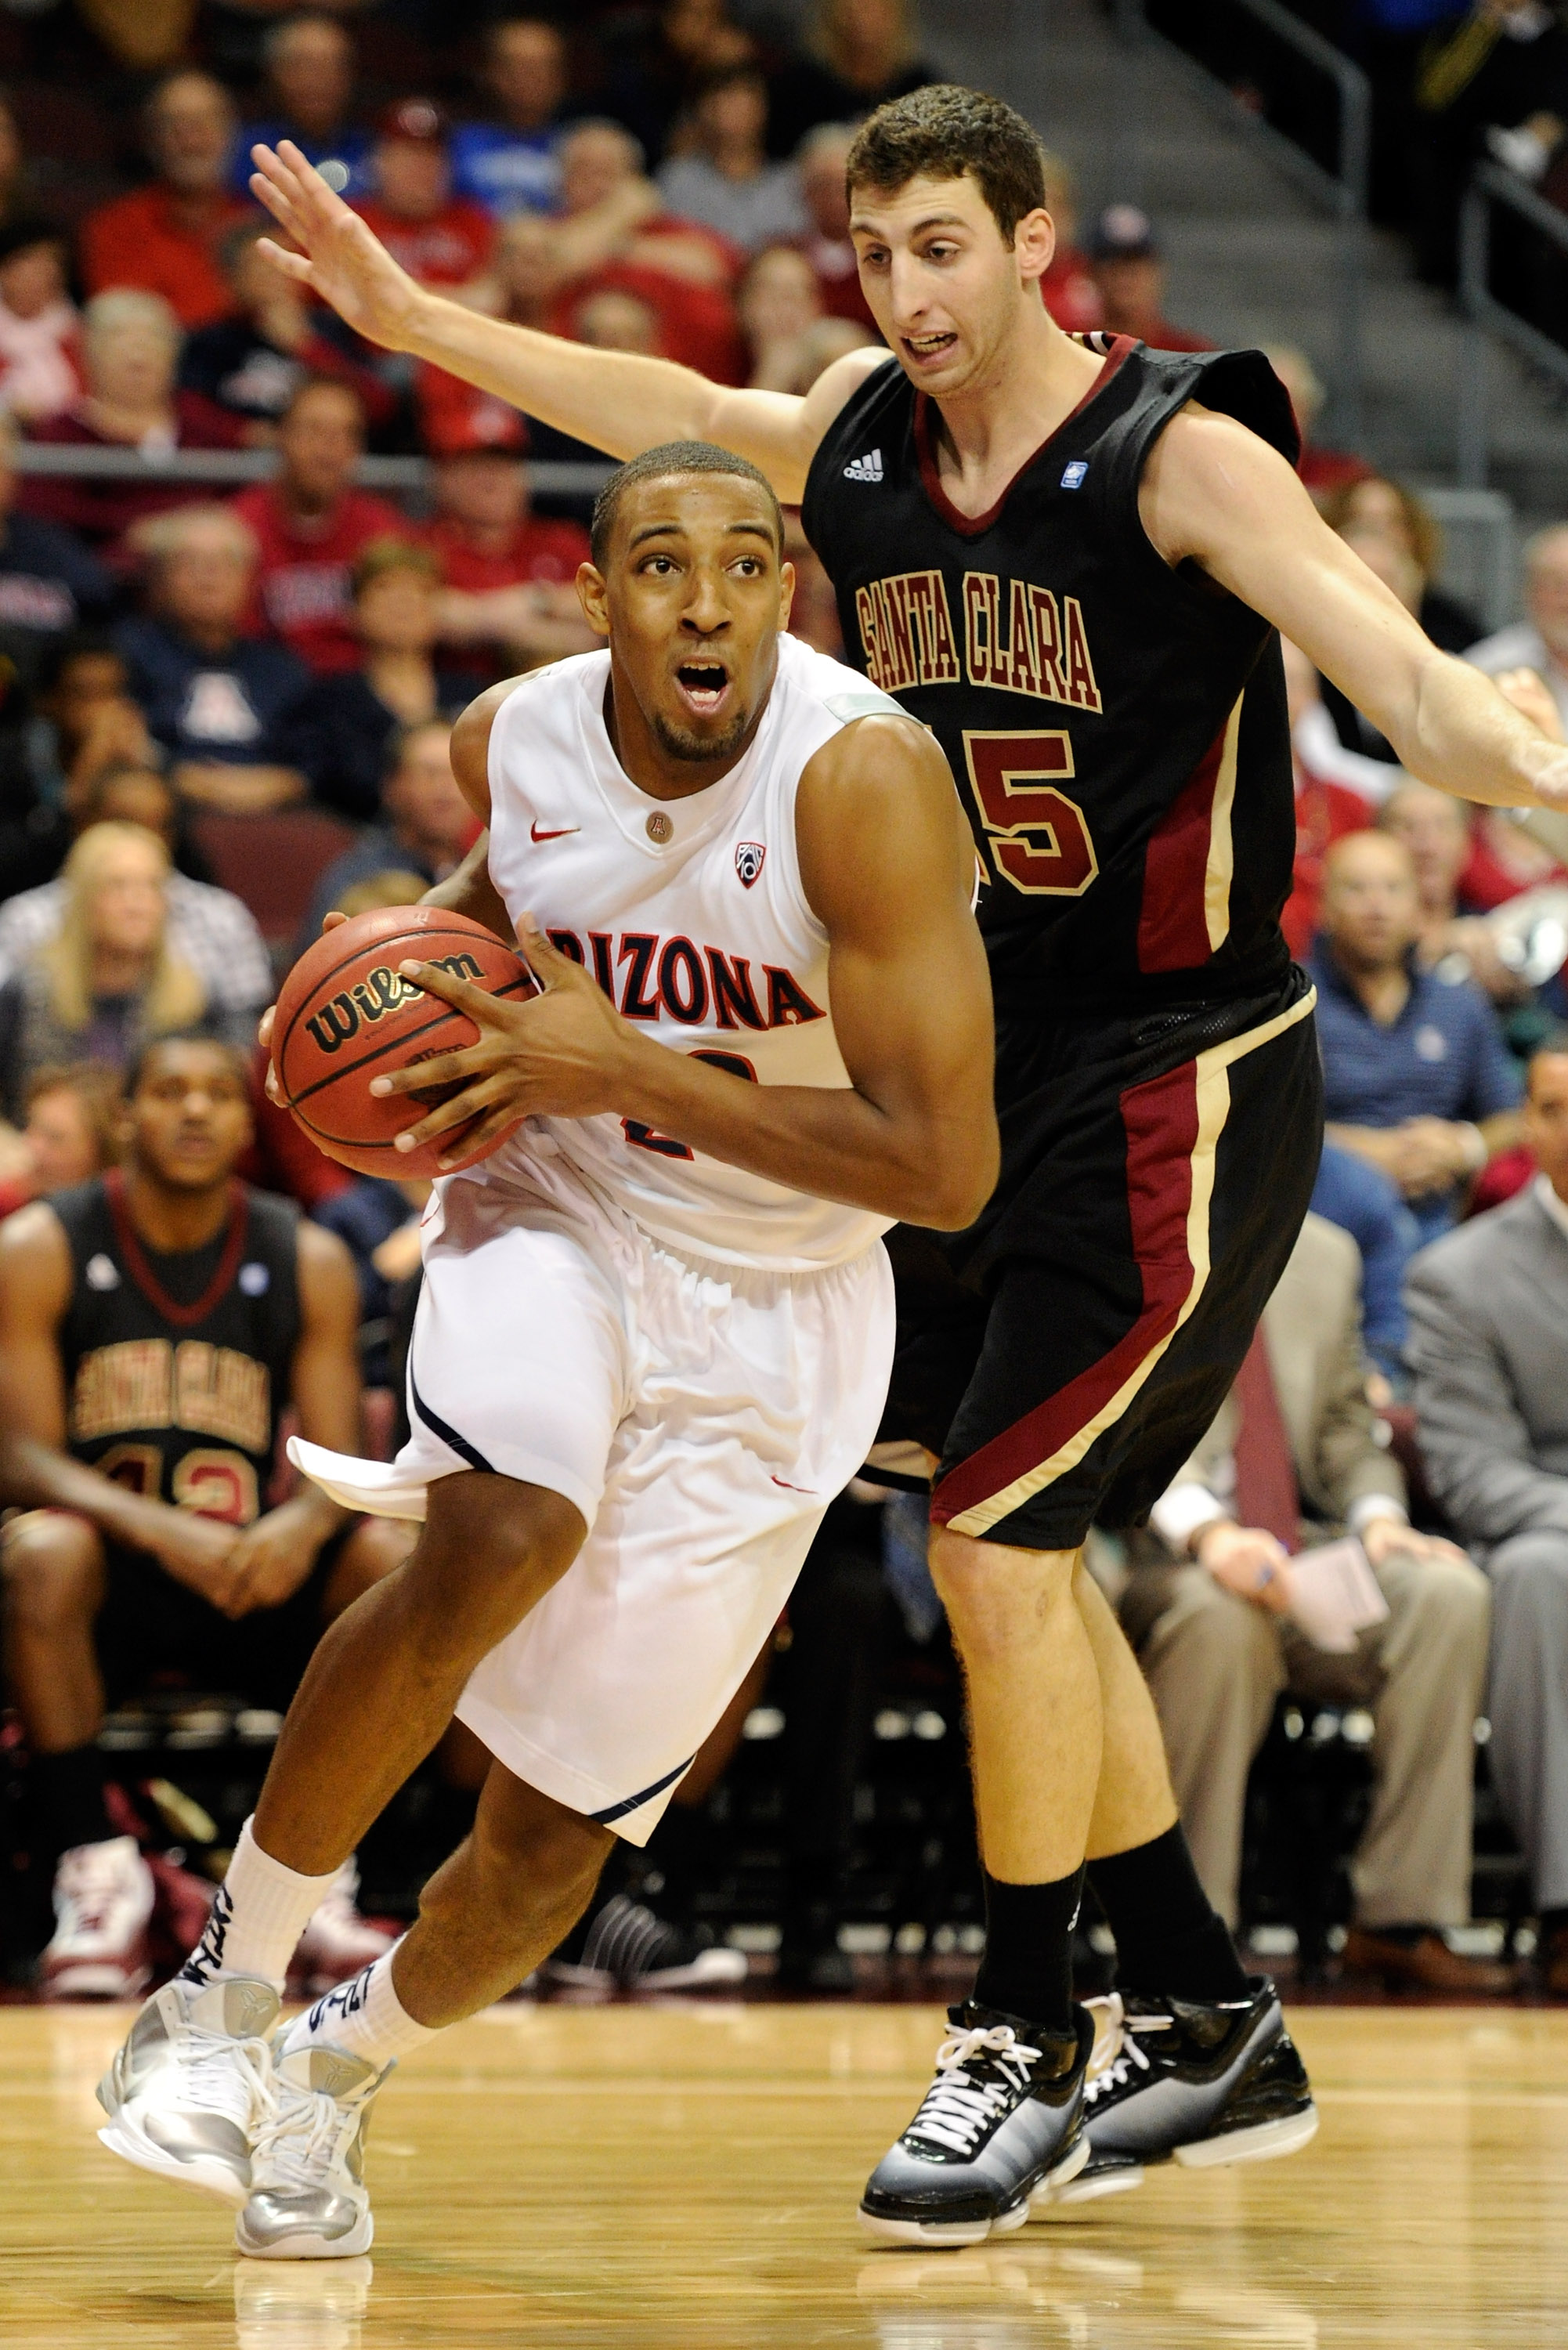 LAS VEGAS - NOVEMBER 26:  Derrick Williams #23 of the Arizona Wildcats drives in front of Marc Trasolini #15 of the Santa Clara Broncos during the third round of the Las Vegas Invitational at The Orleans Arena November 26, 2010 in Las Vegas, Nevada.  (Pho